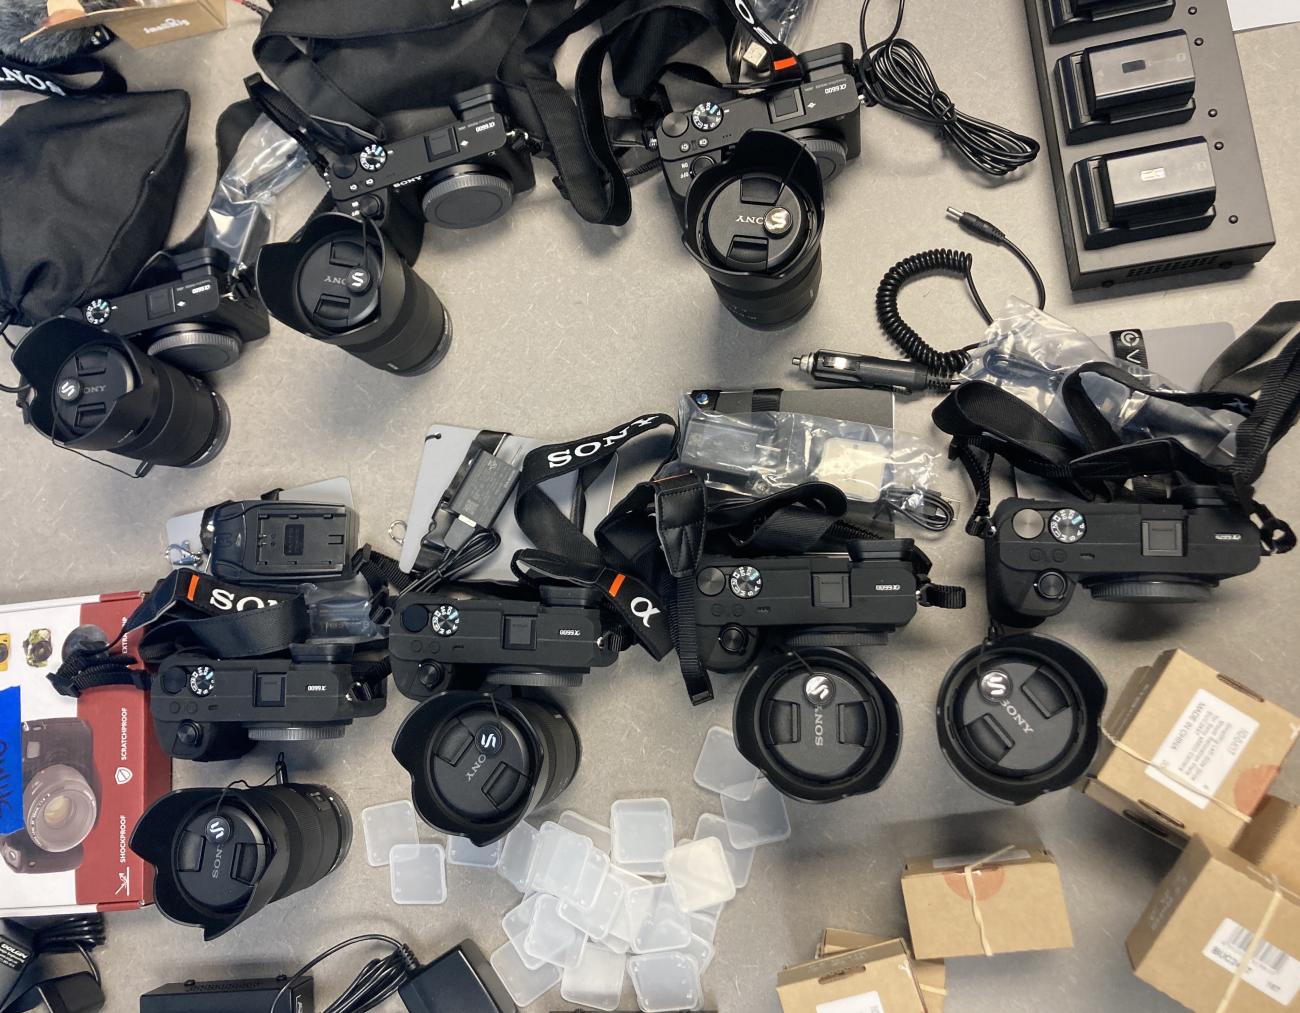 An assortment of equipment items, including cameras, lenses, batteries and packaging.